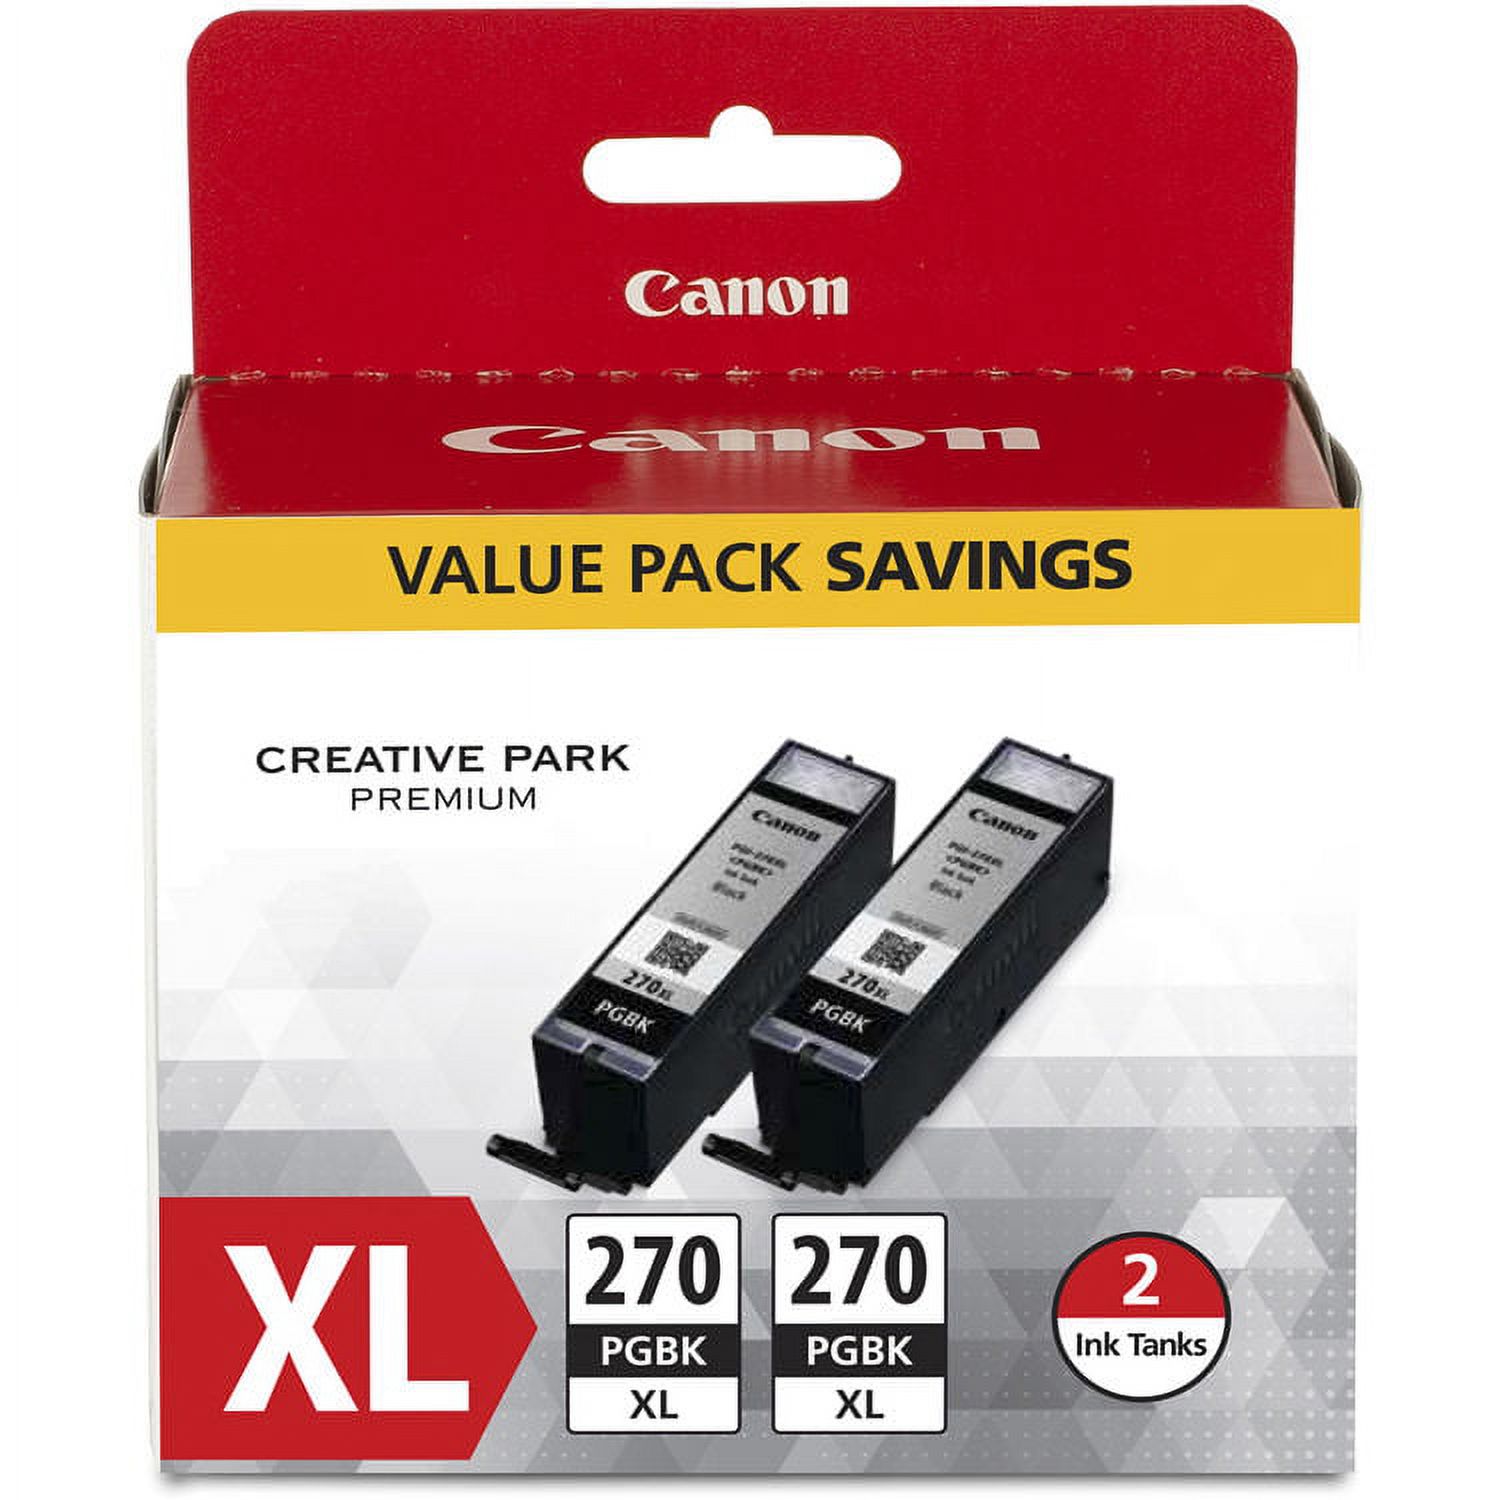 Genuine Canon CLI-271 Ink Tank 4-Pack (0390C005) + PGI-270XL Pigment Black Ink Tank Twin Pack (0319C005) - image 2 of 3